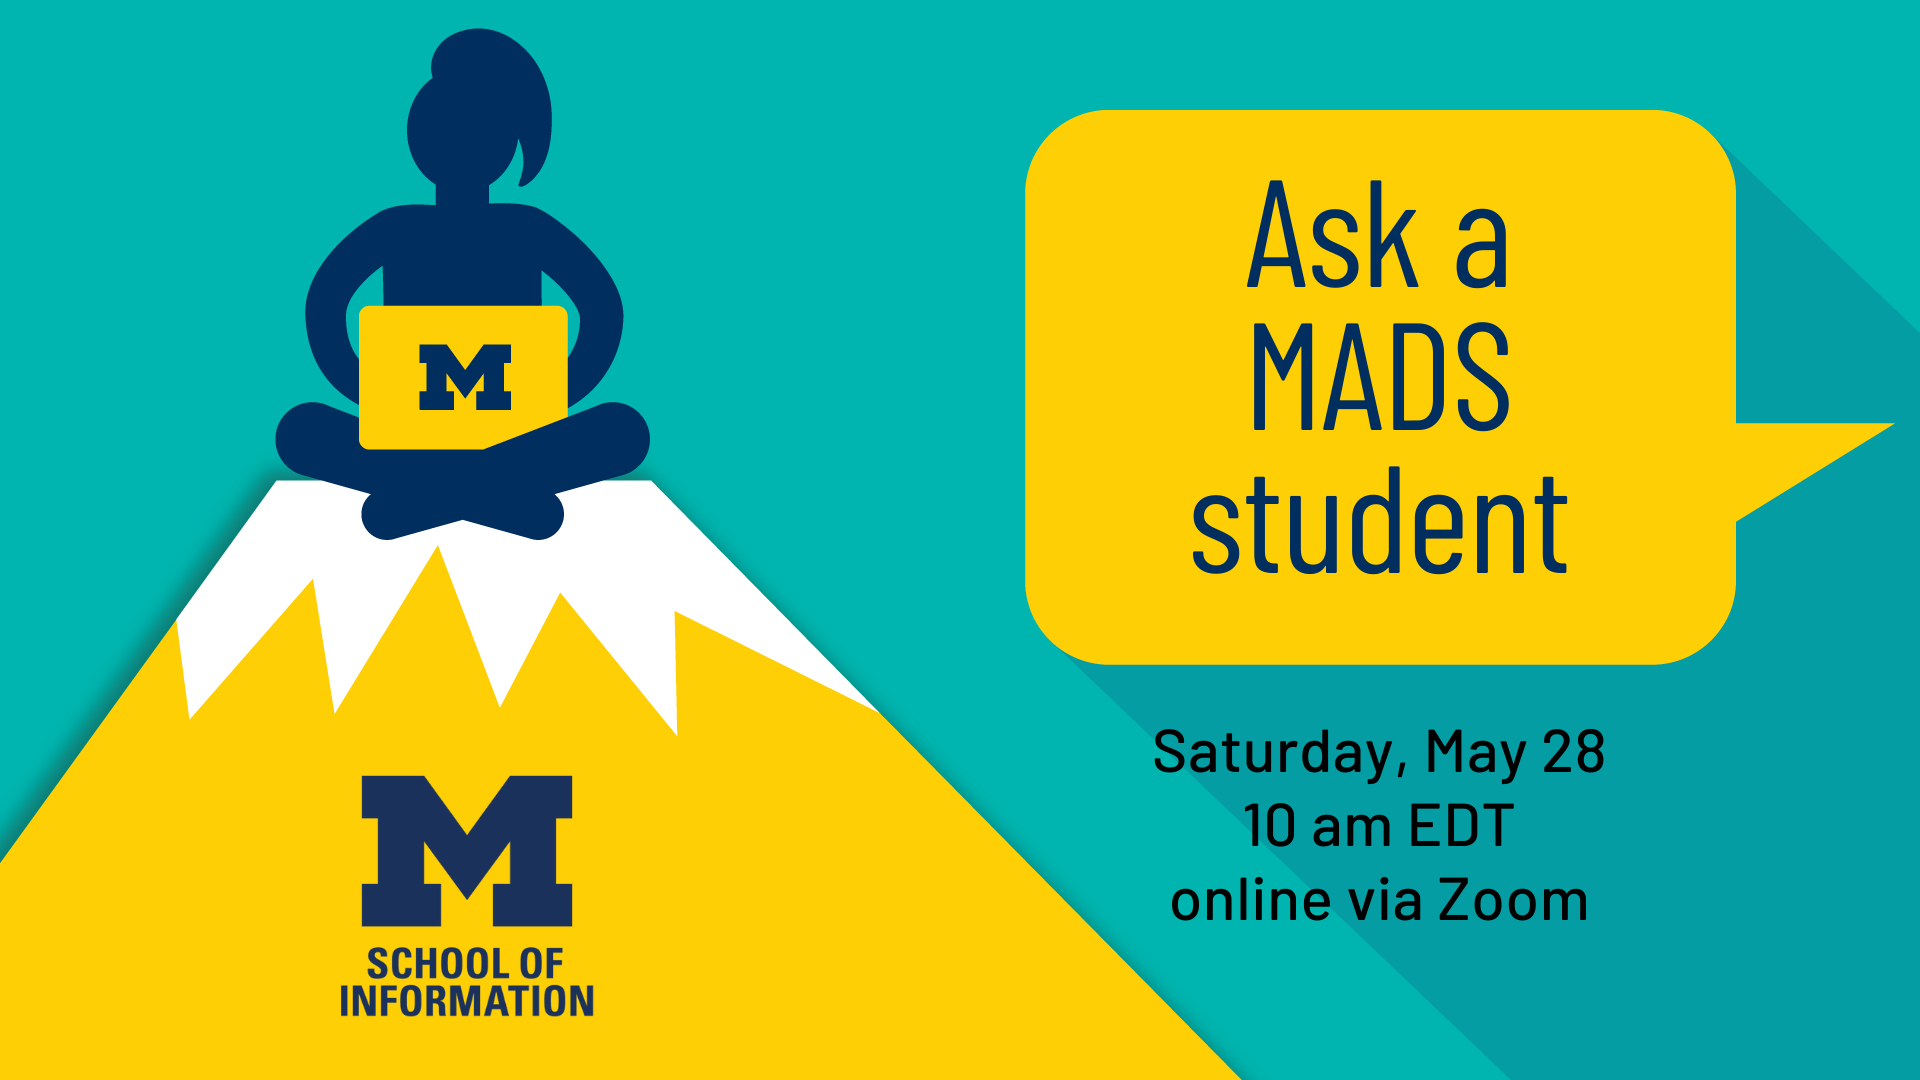 “Ask a MADS student. Saturday, May 28. 10 am EDT. Online via Zoom.”